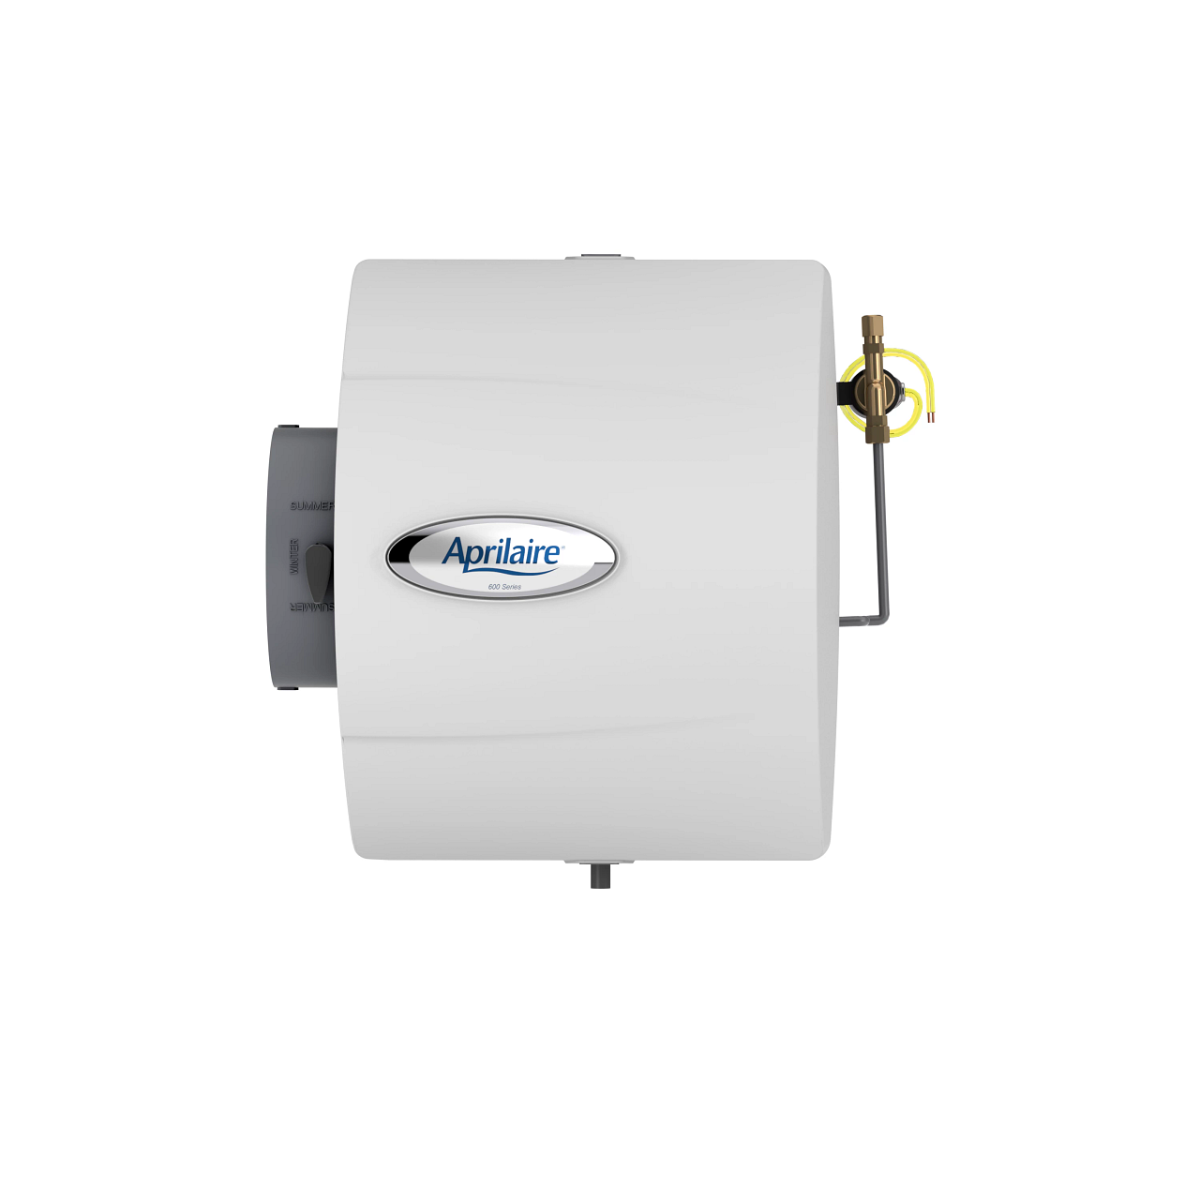 Aprilaire 600m Bypass Humidifier Manual Control